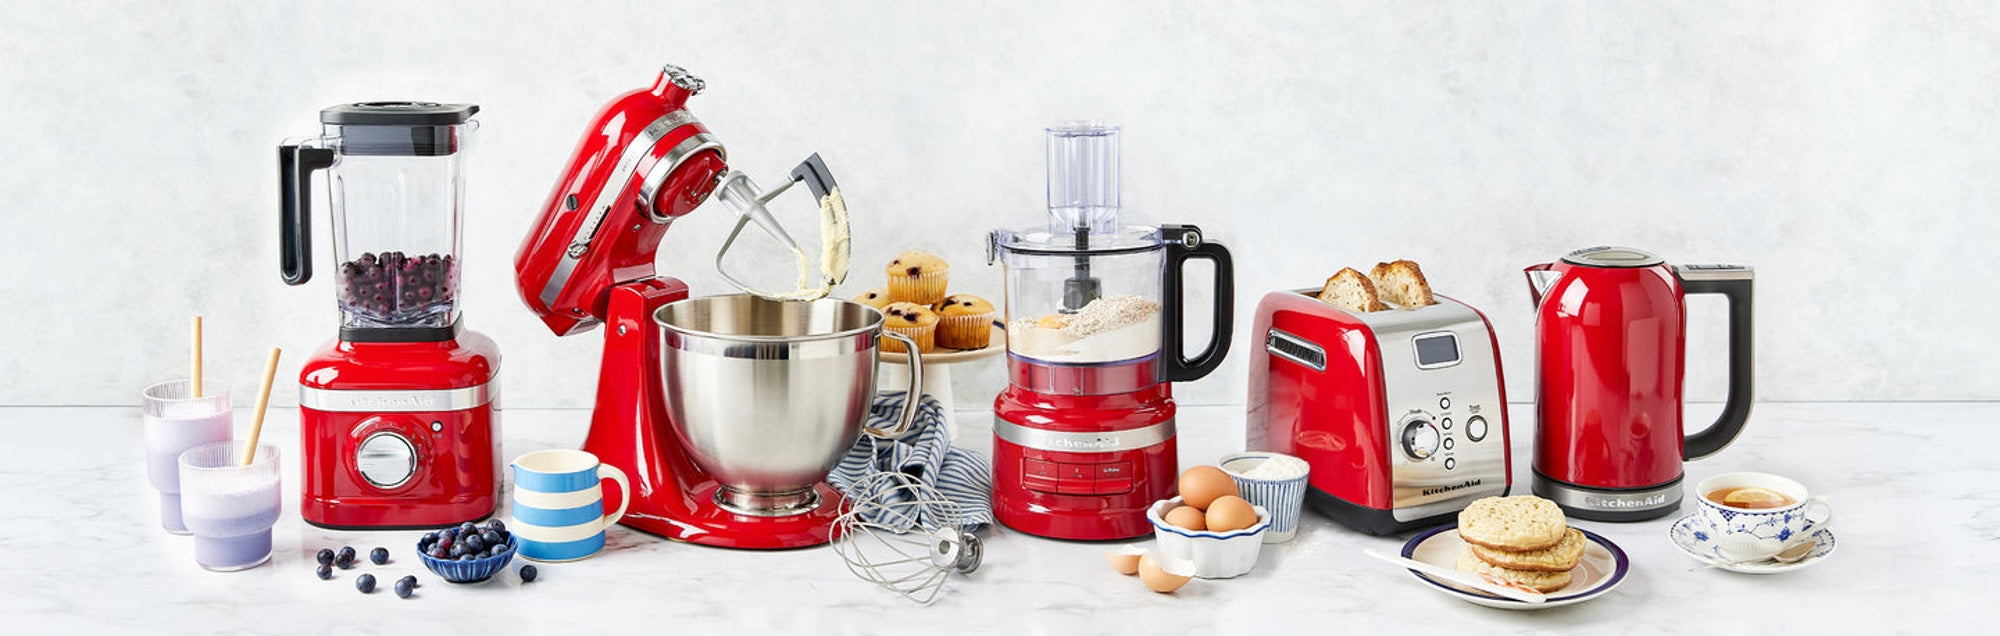 KitchenAid's iconic Empire Red collection featuring food processor, stand mixer, blender, toaster and kettle.